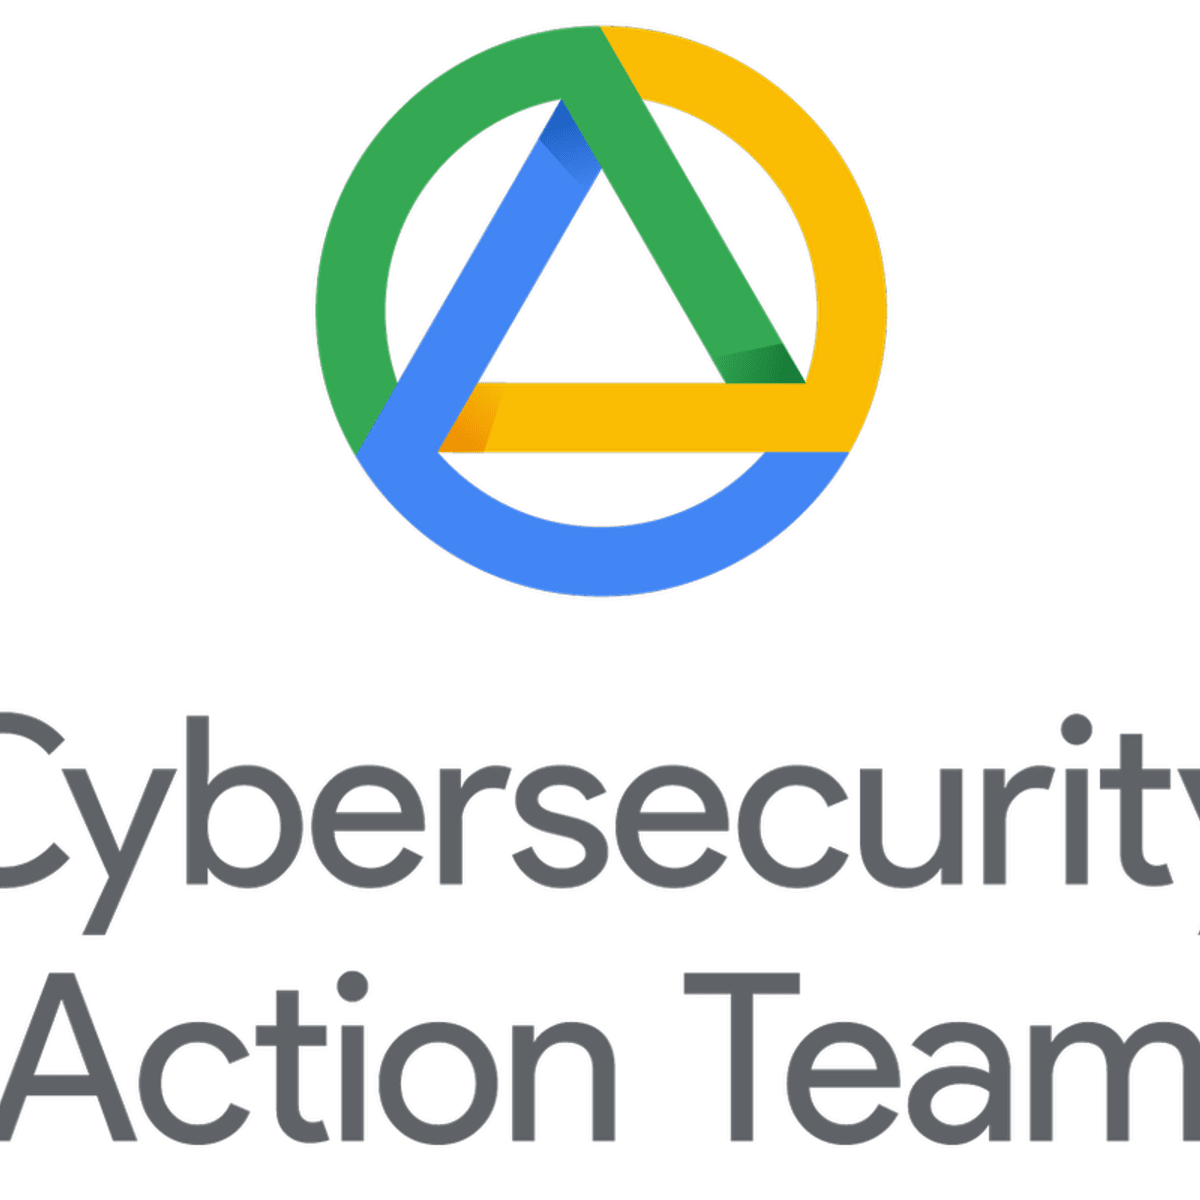 Google Cybersecurity Action Team: Cybersecurity Essentials